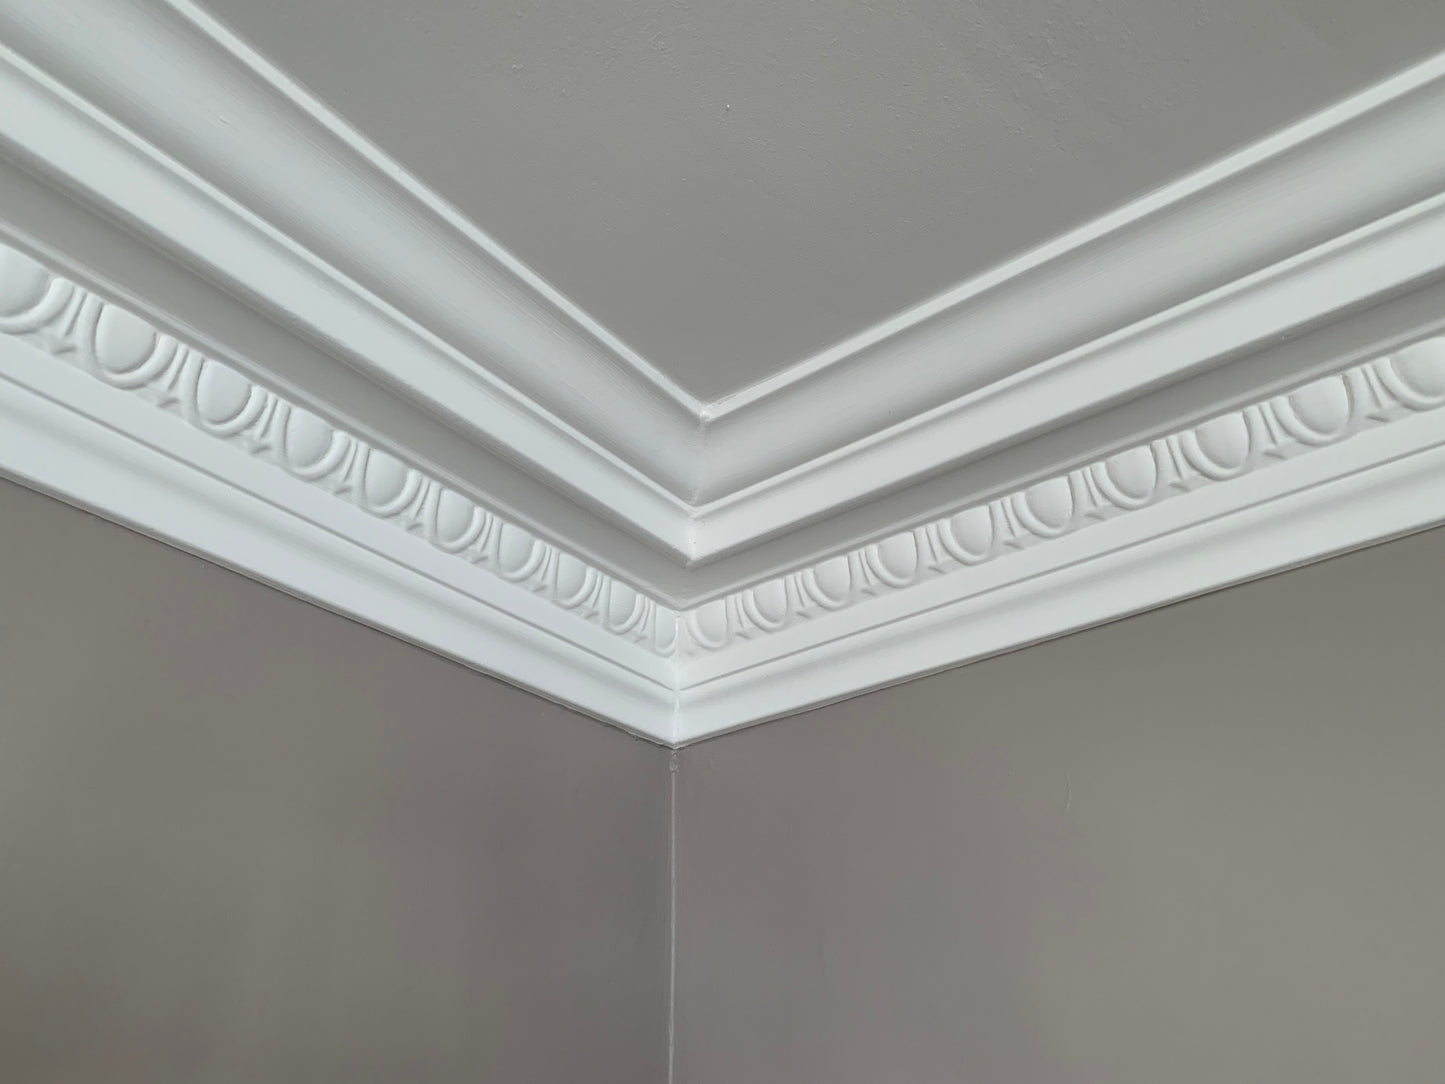 The corner of an installed Egg & Dart - Classic Coving